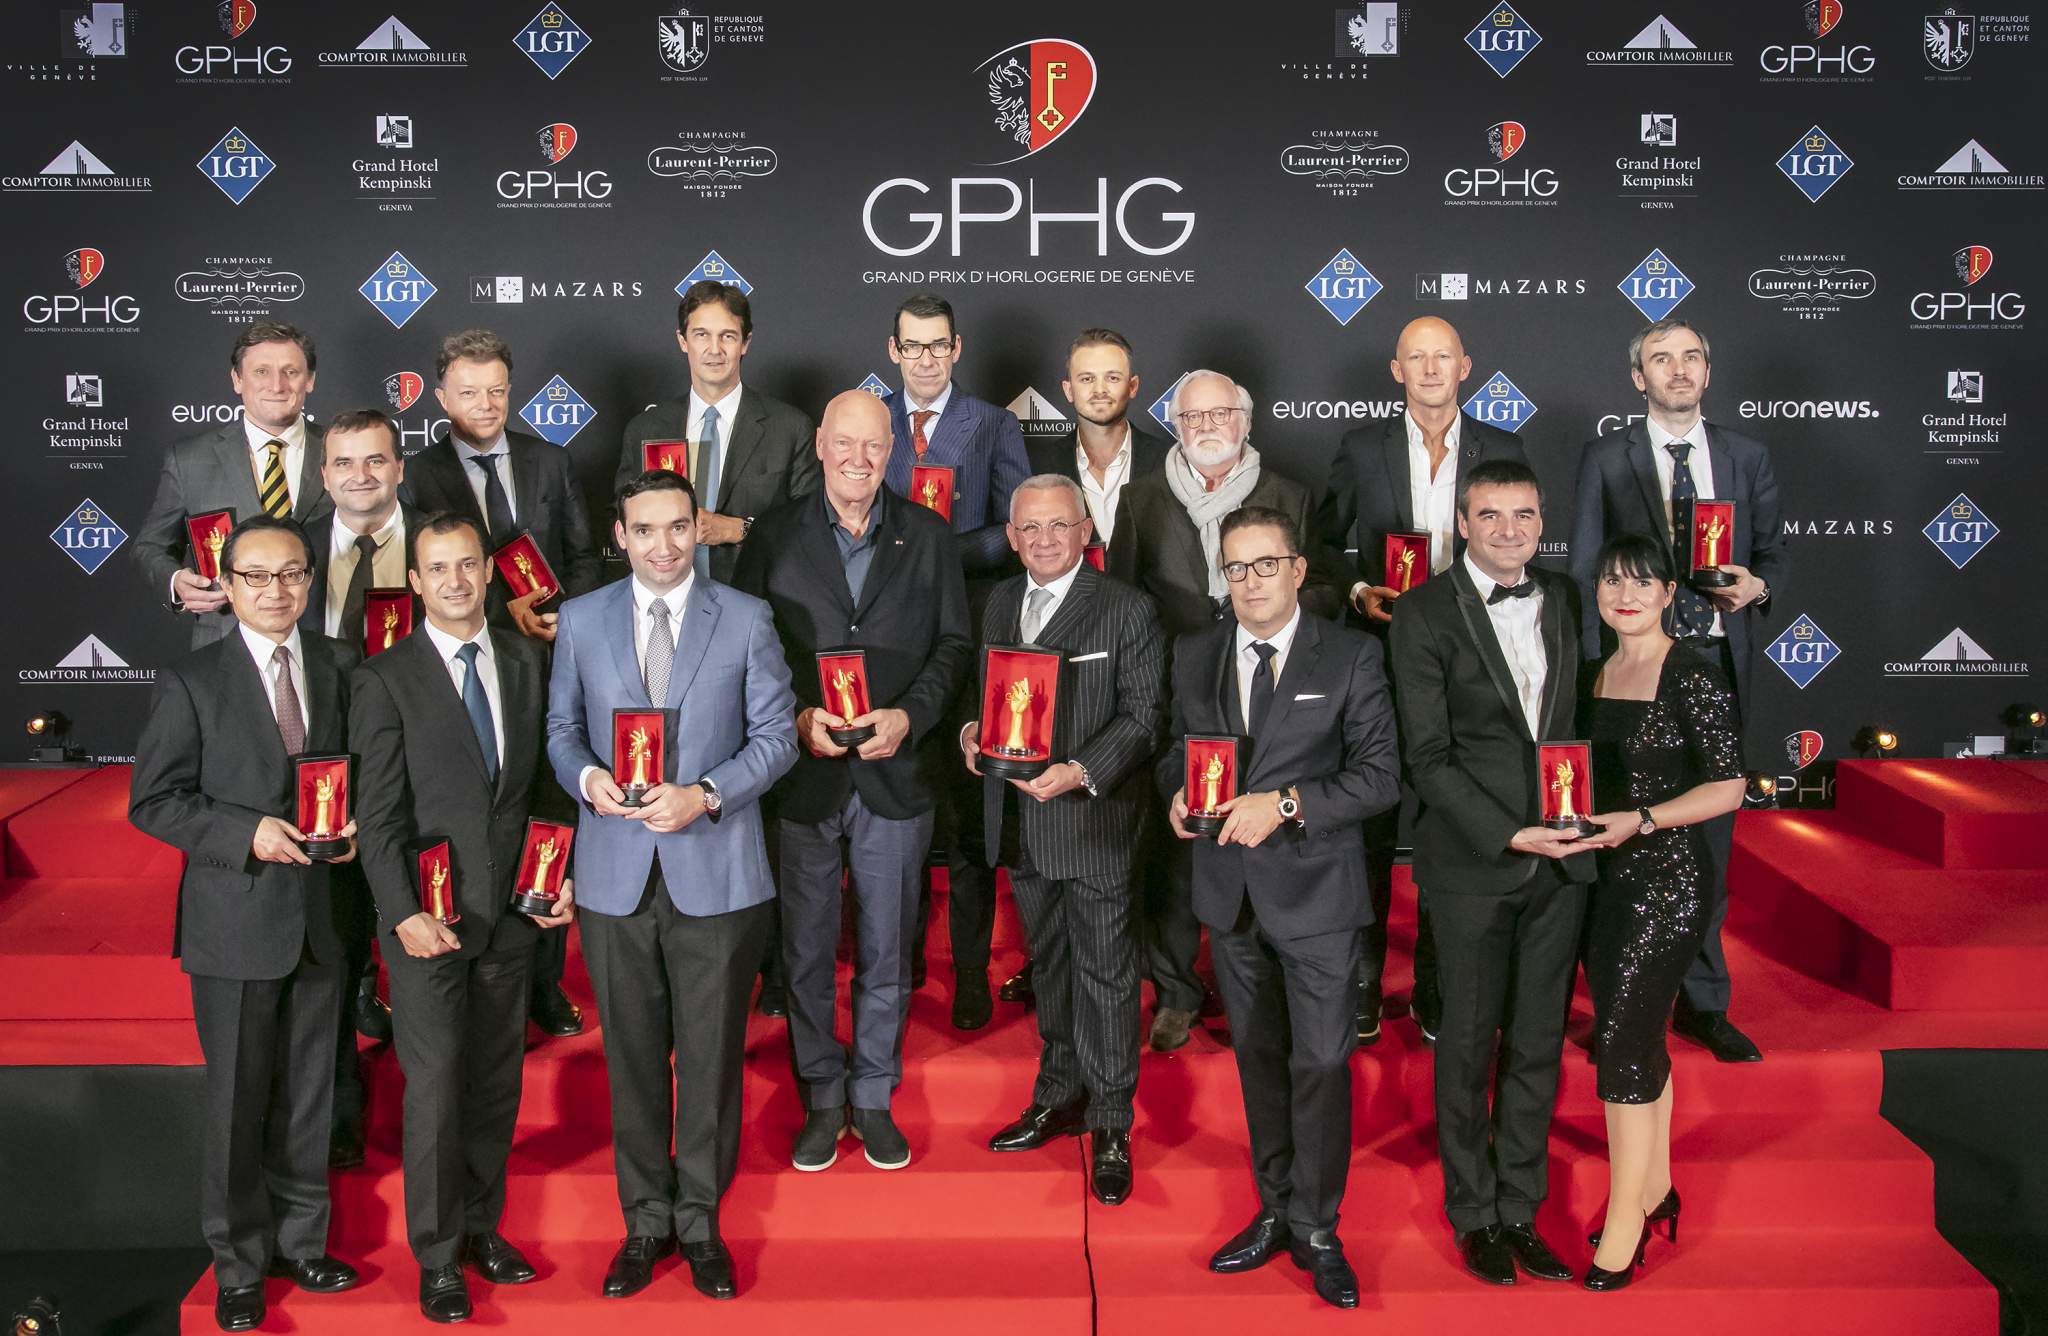 Pascal Raffy (Owner of Bovet 1822) Jean-Claude Biver (President non-executive of the LVMH Group Watch division, Chairman of Hublot &amp; Zenith) Uwe Ahrendt (CEO of Nomos Glashütte) Maria &amp; Richard Habring (CEOs and owners of Habring2) Atsushi Kaneko (Director of Seiko Watch Corporation) Rexhep Rexhepi (Watchmaker and Founder of Akrivia) Nicolas Beau (Directeur International Horlogerie et Joaillerie of Chanel) Eric de Rocquigny (Directeur International Operations &amp; Métiers of Van Cleef &amp; Arpels) Laurent Dordet (La Montre Hermès CEO) Laurent Ferrier (Founder) Marco Borraccino (Co-founder and CEO of Singer Reimagined) Pierre Jacques (President and CEO of De Bethune) Stephen Forsey (Co-founder of Greubel Forsey) Konstantin Chaykin (Founder) Rémi Maillat (Founder of Krayon) Christian Selmoni (Style and Heritage Director at Vacheron Constantin )